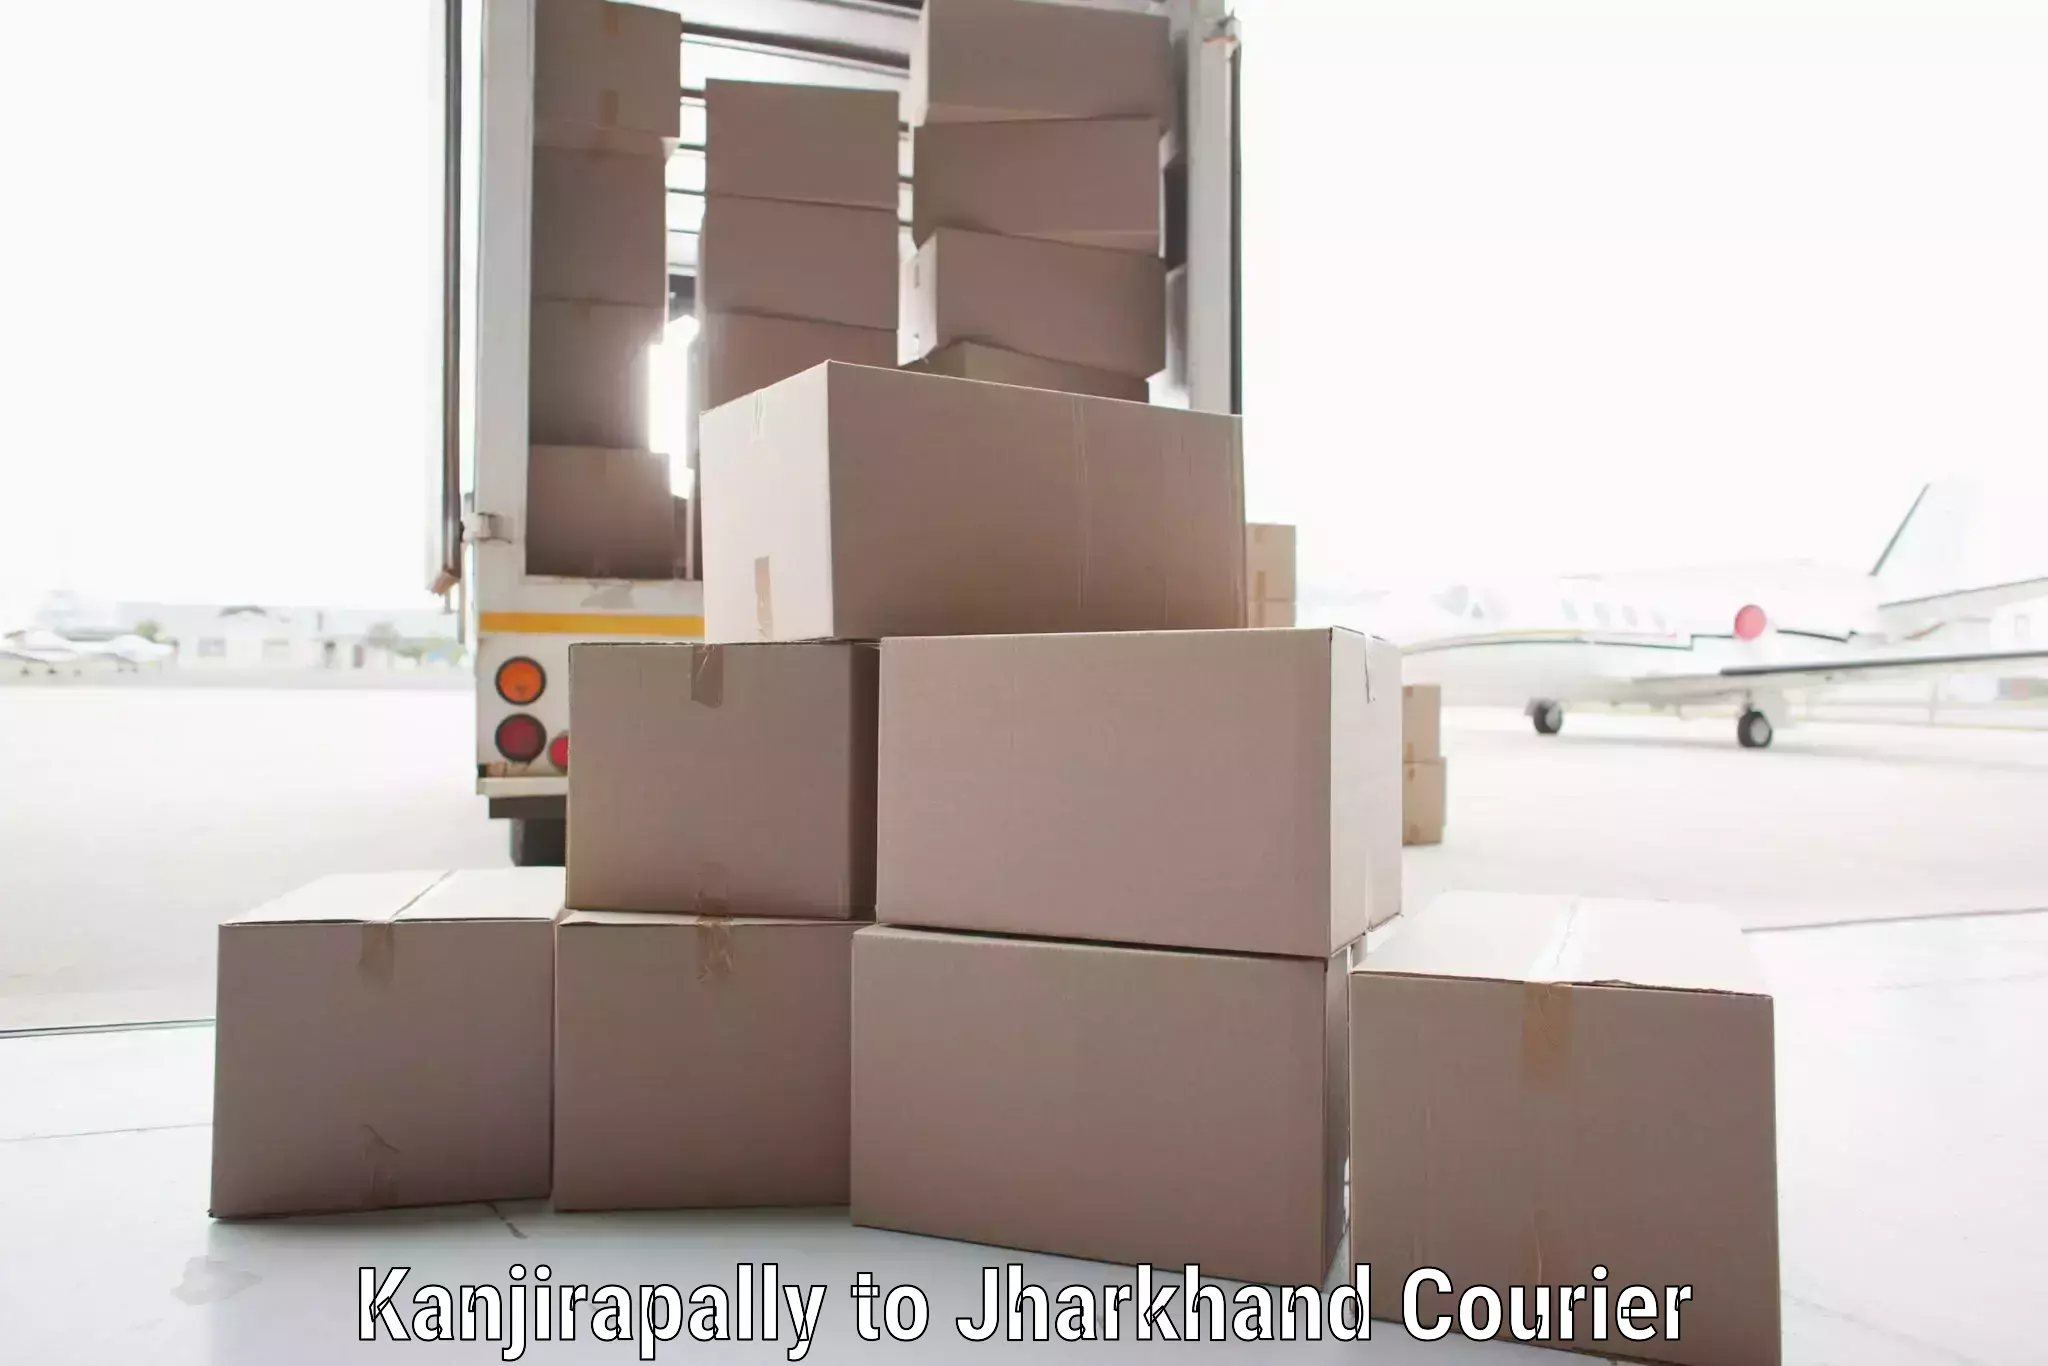 Global freight services Kanjirapally to Koderma